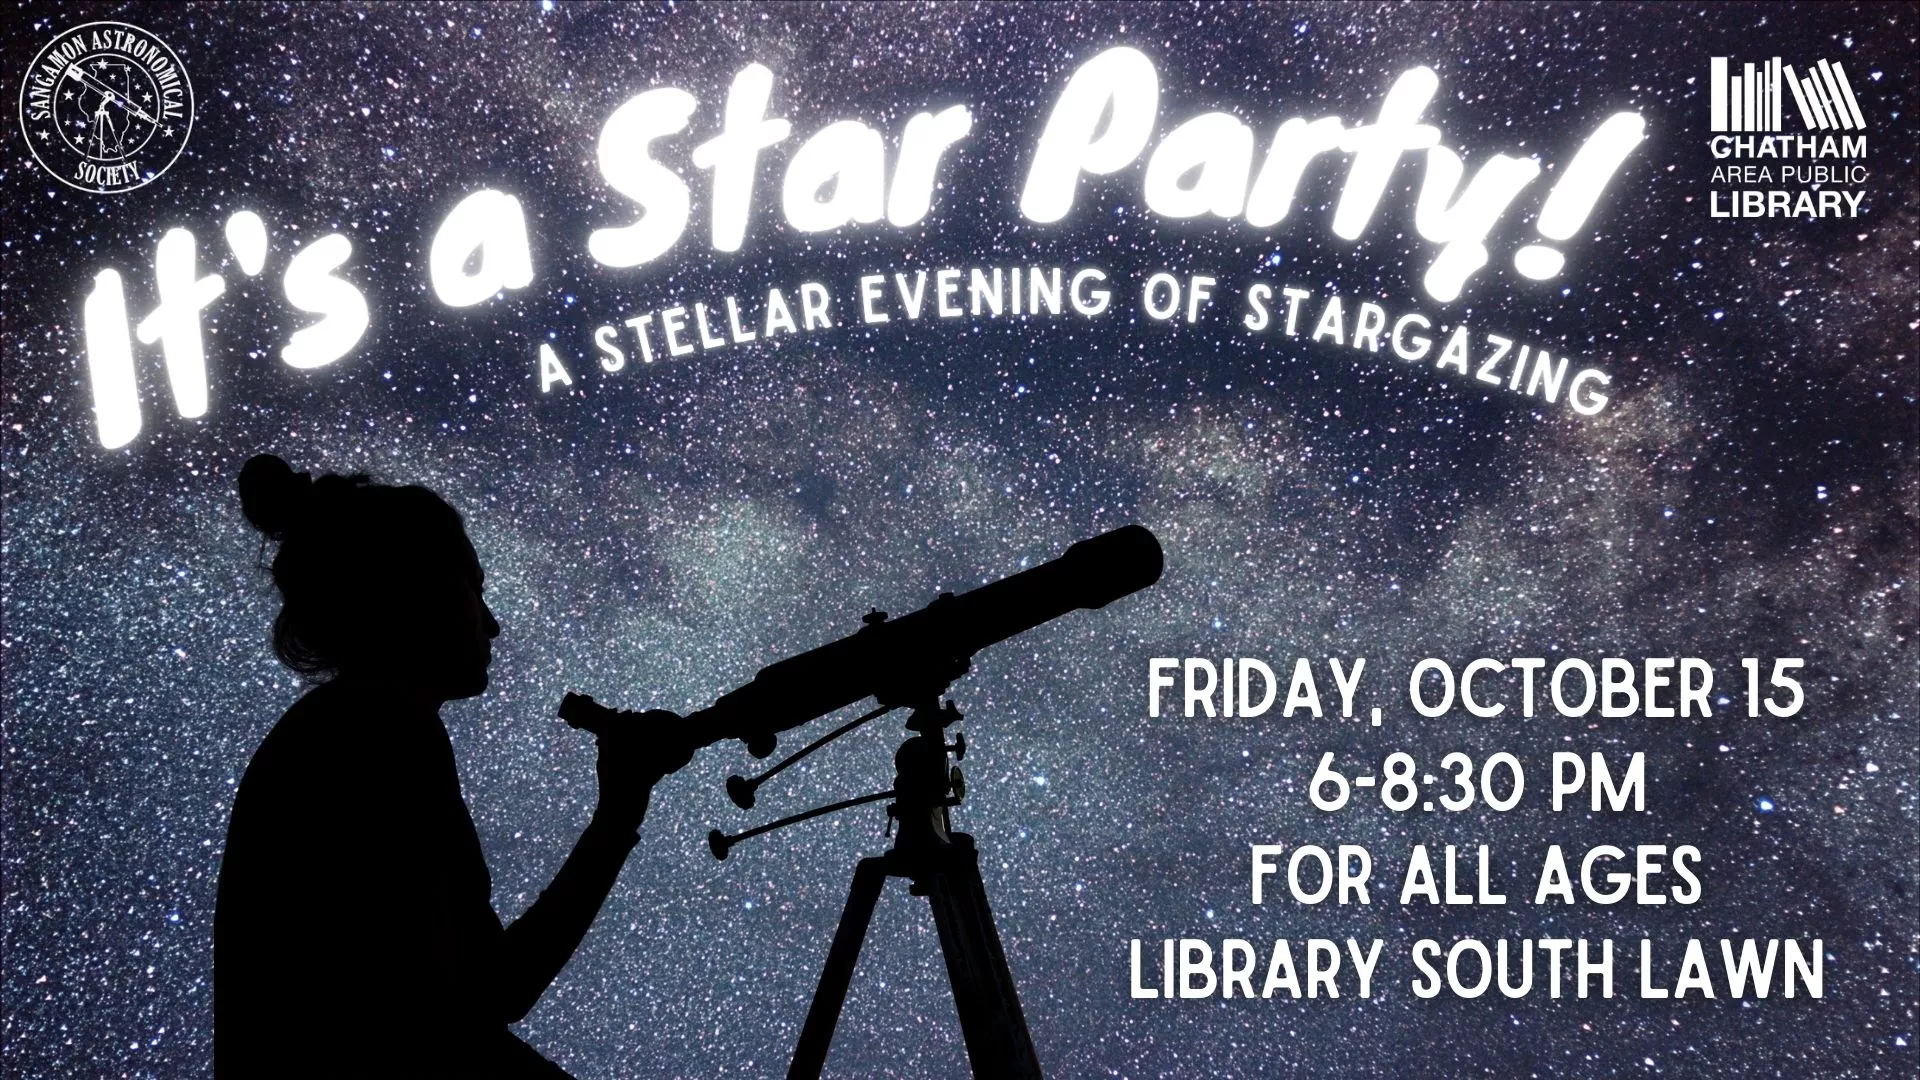 It's a Star Party! banner